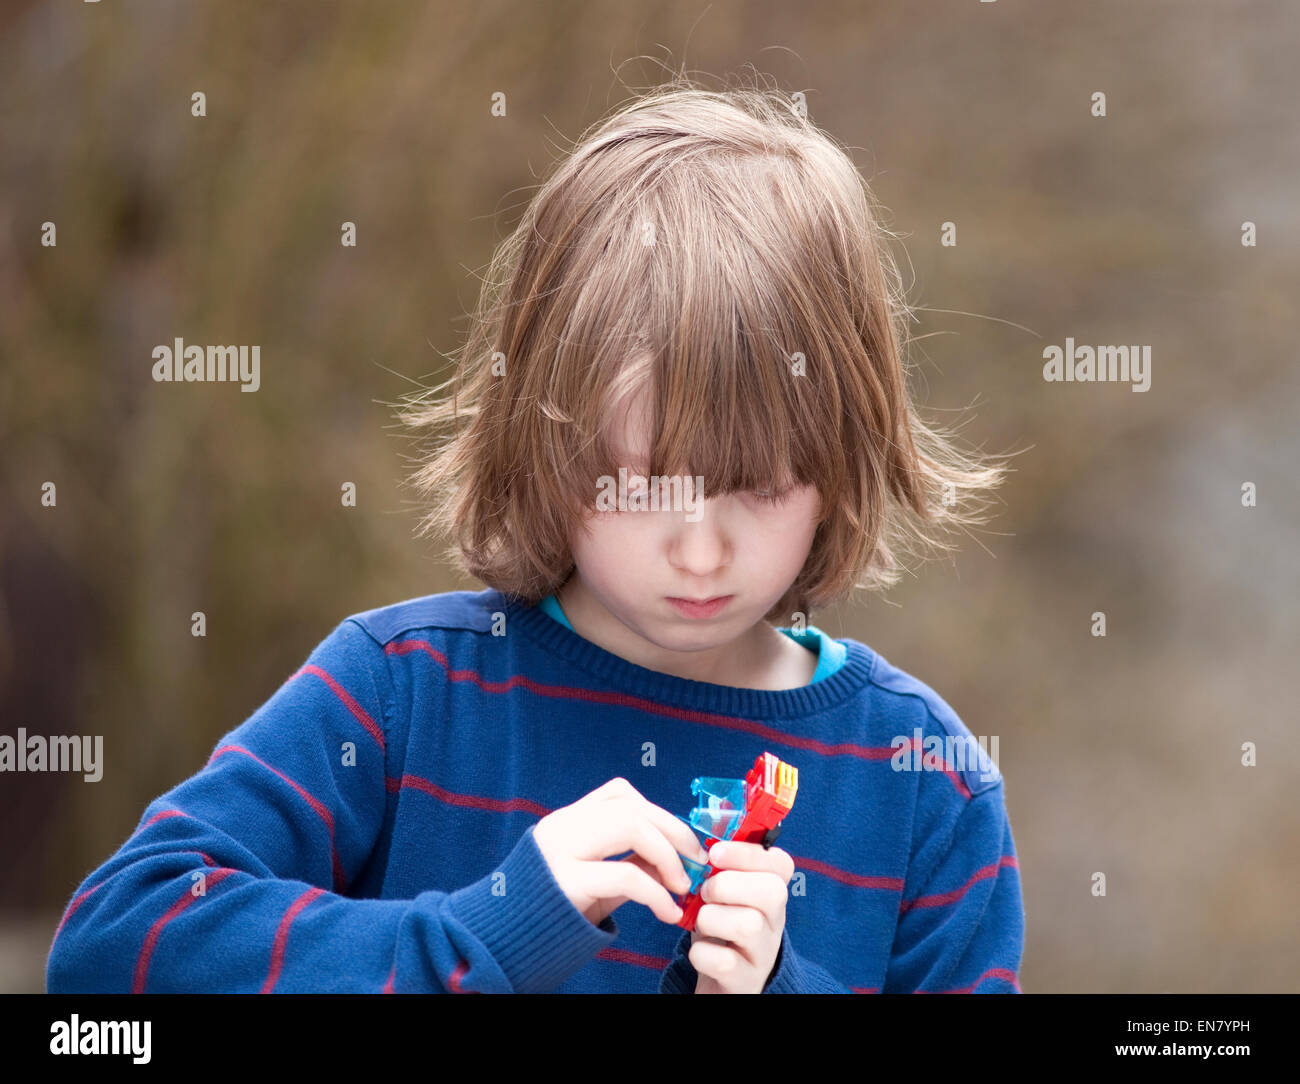 Boy Putting Together his Assembling Toys Outdoors Stock Photo